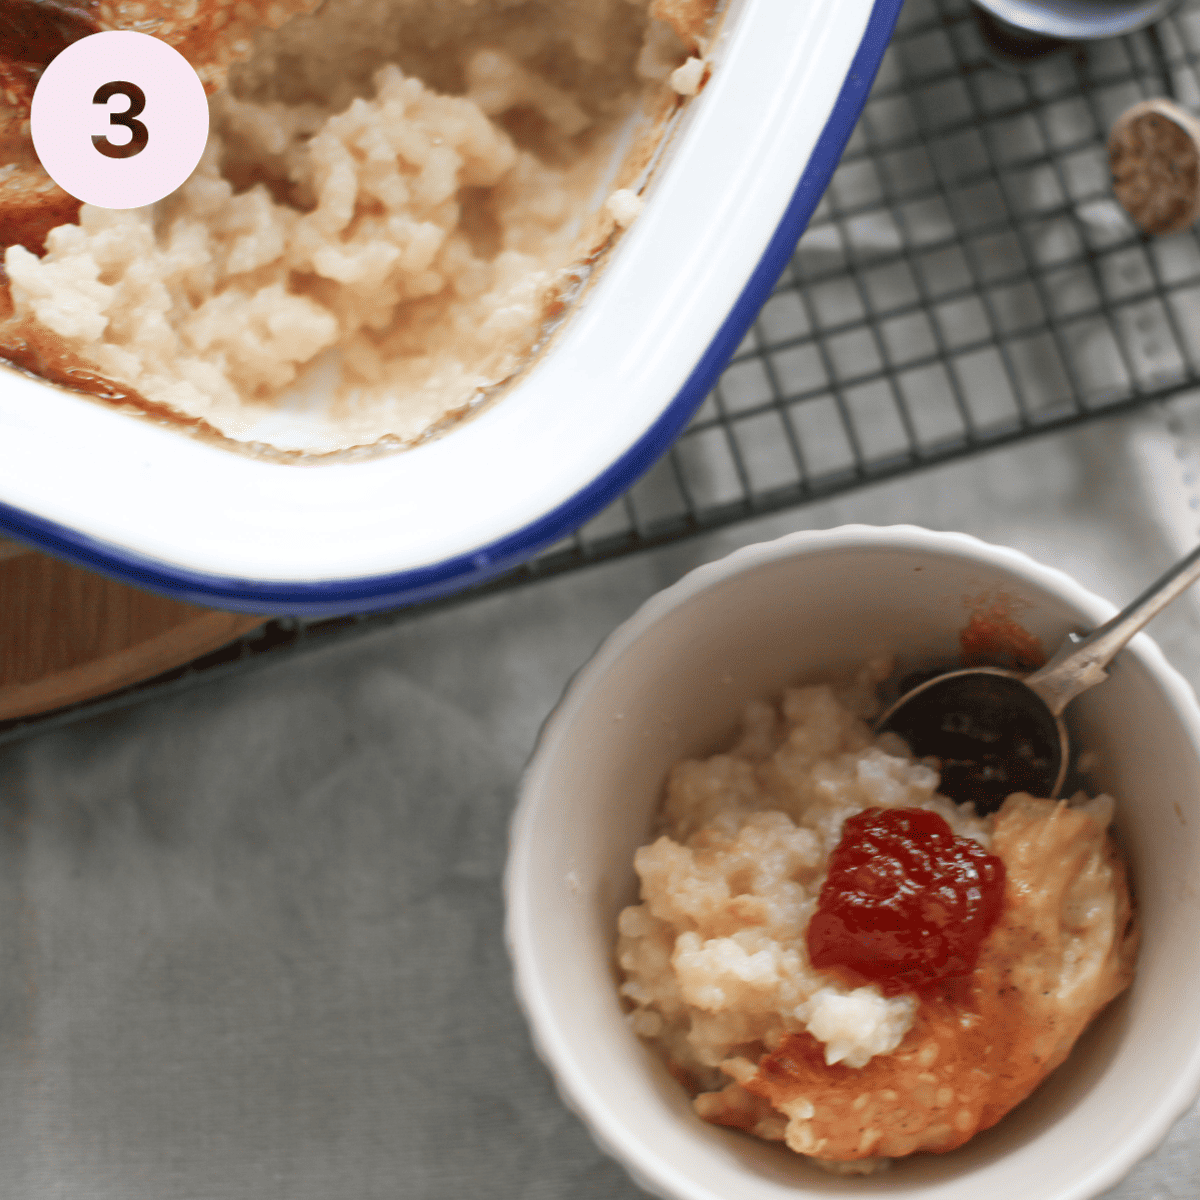 Rice pudding with jam.